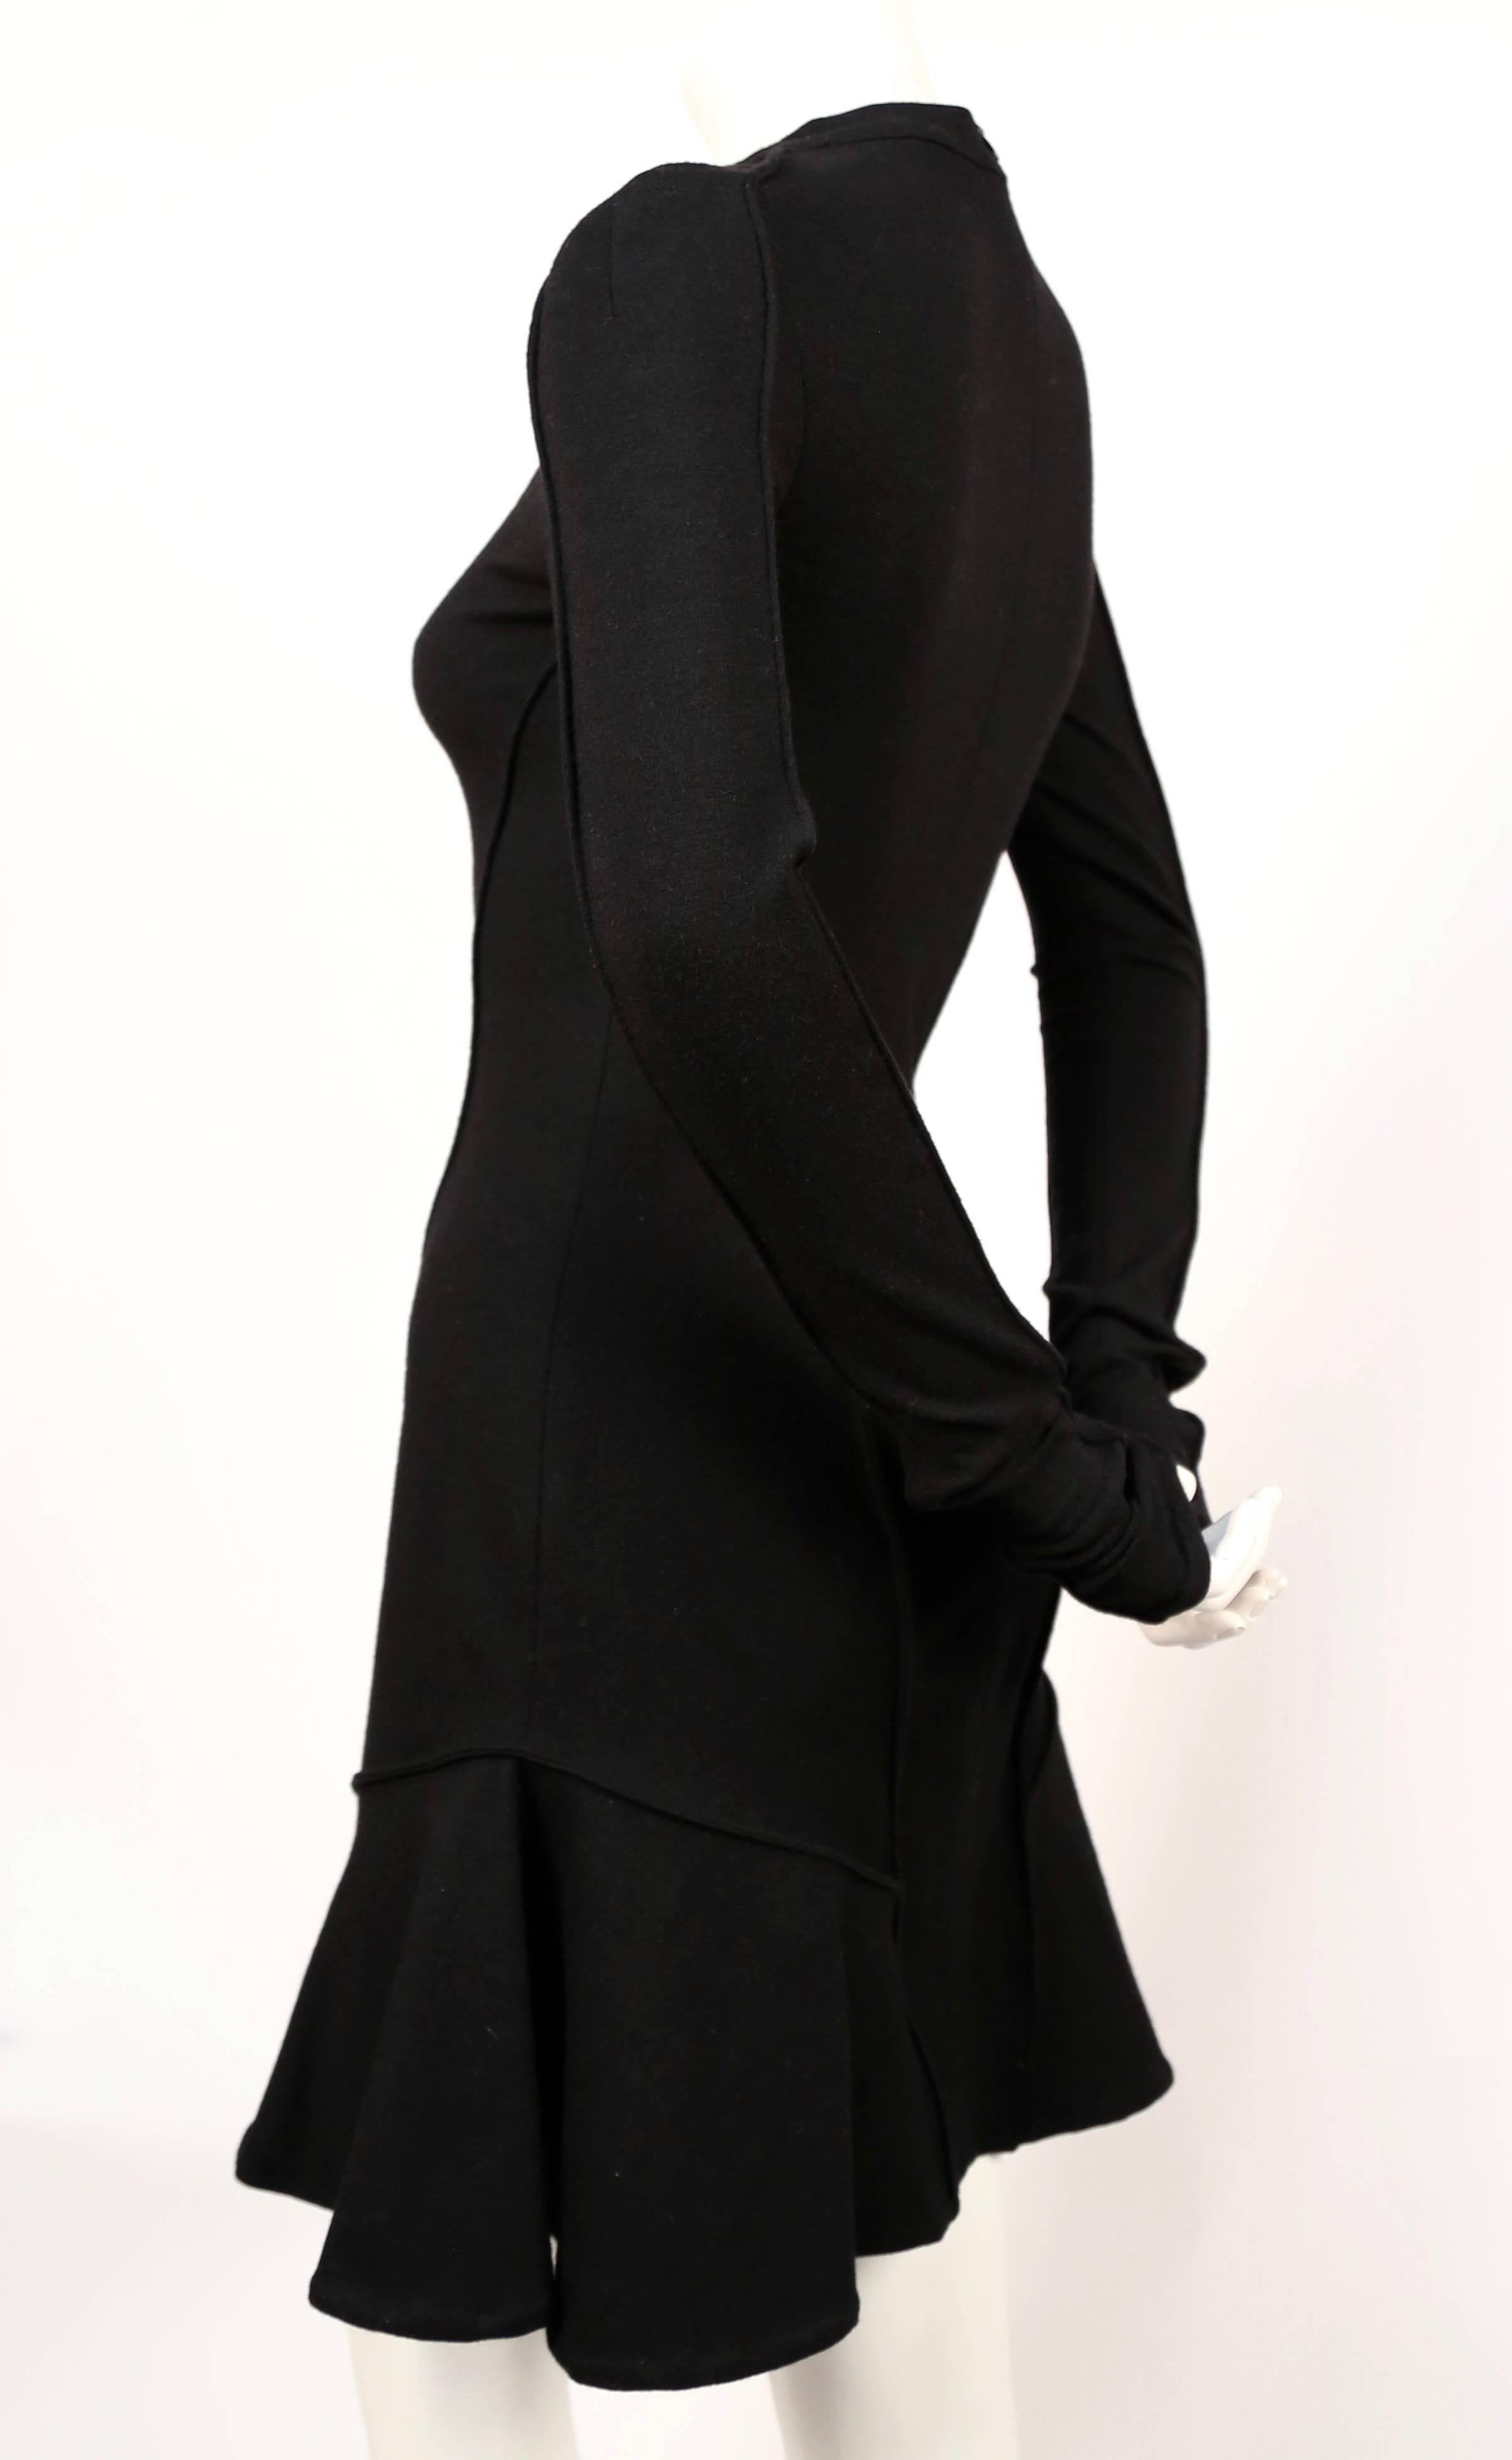 Black wool scuba style dress with flared skirt designed by Nicolas Ghesquiere for Balenciaga dating to fall of 2002. Beautiful seamed detail. Labeled a French size 40. Approximate measurements: bust 32